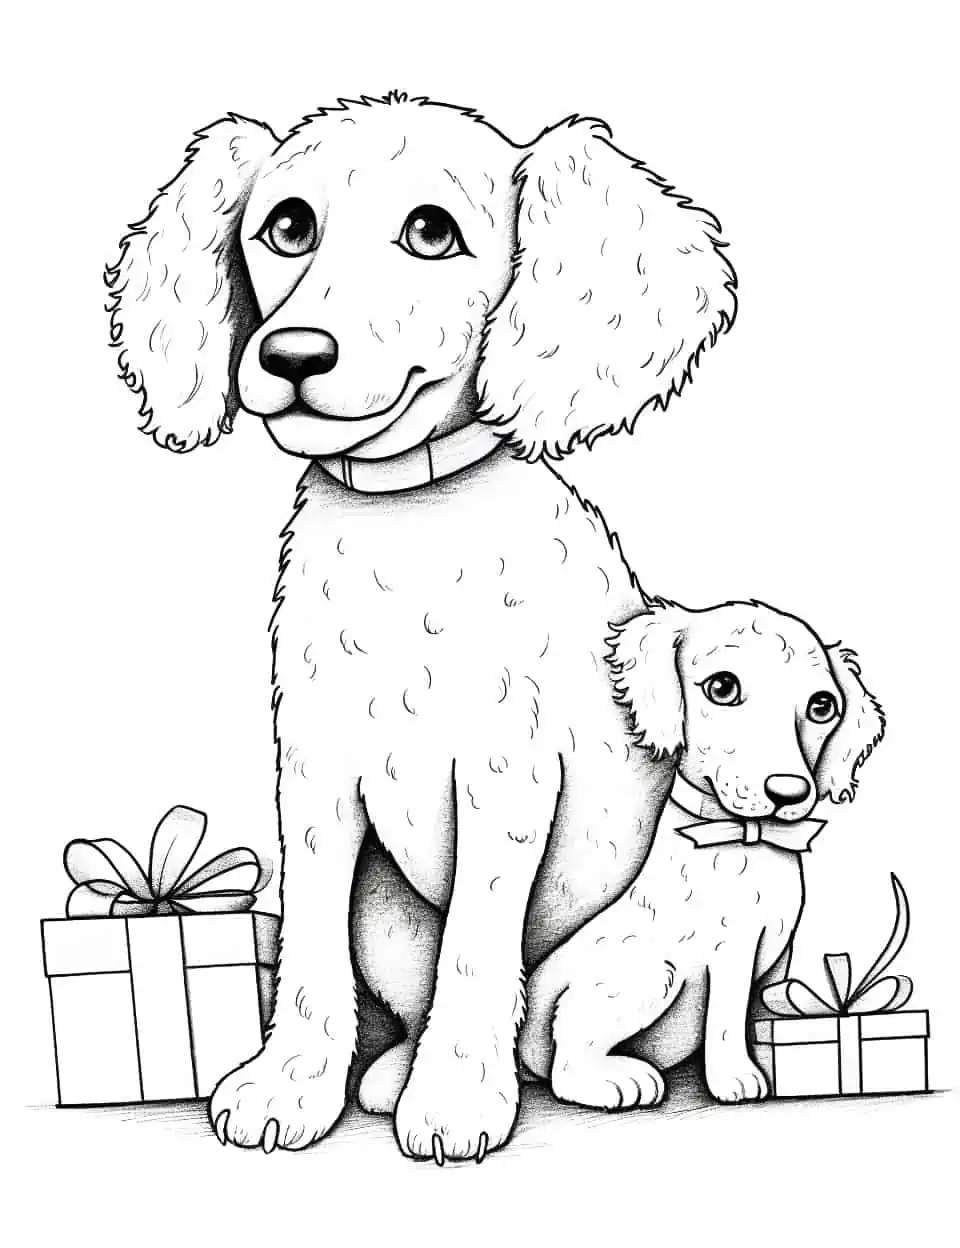 Christmas with Poodles Dog Coloring Page - A couple of Poodles playfully waiting to open their Christmas gifts.